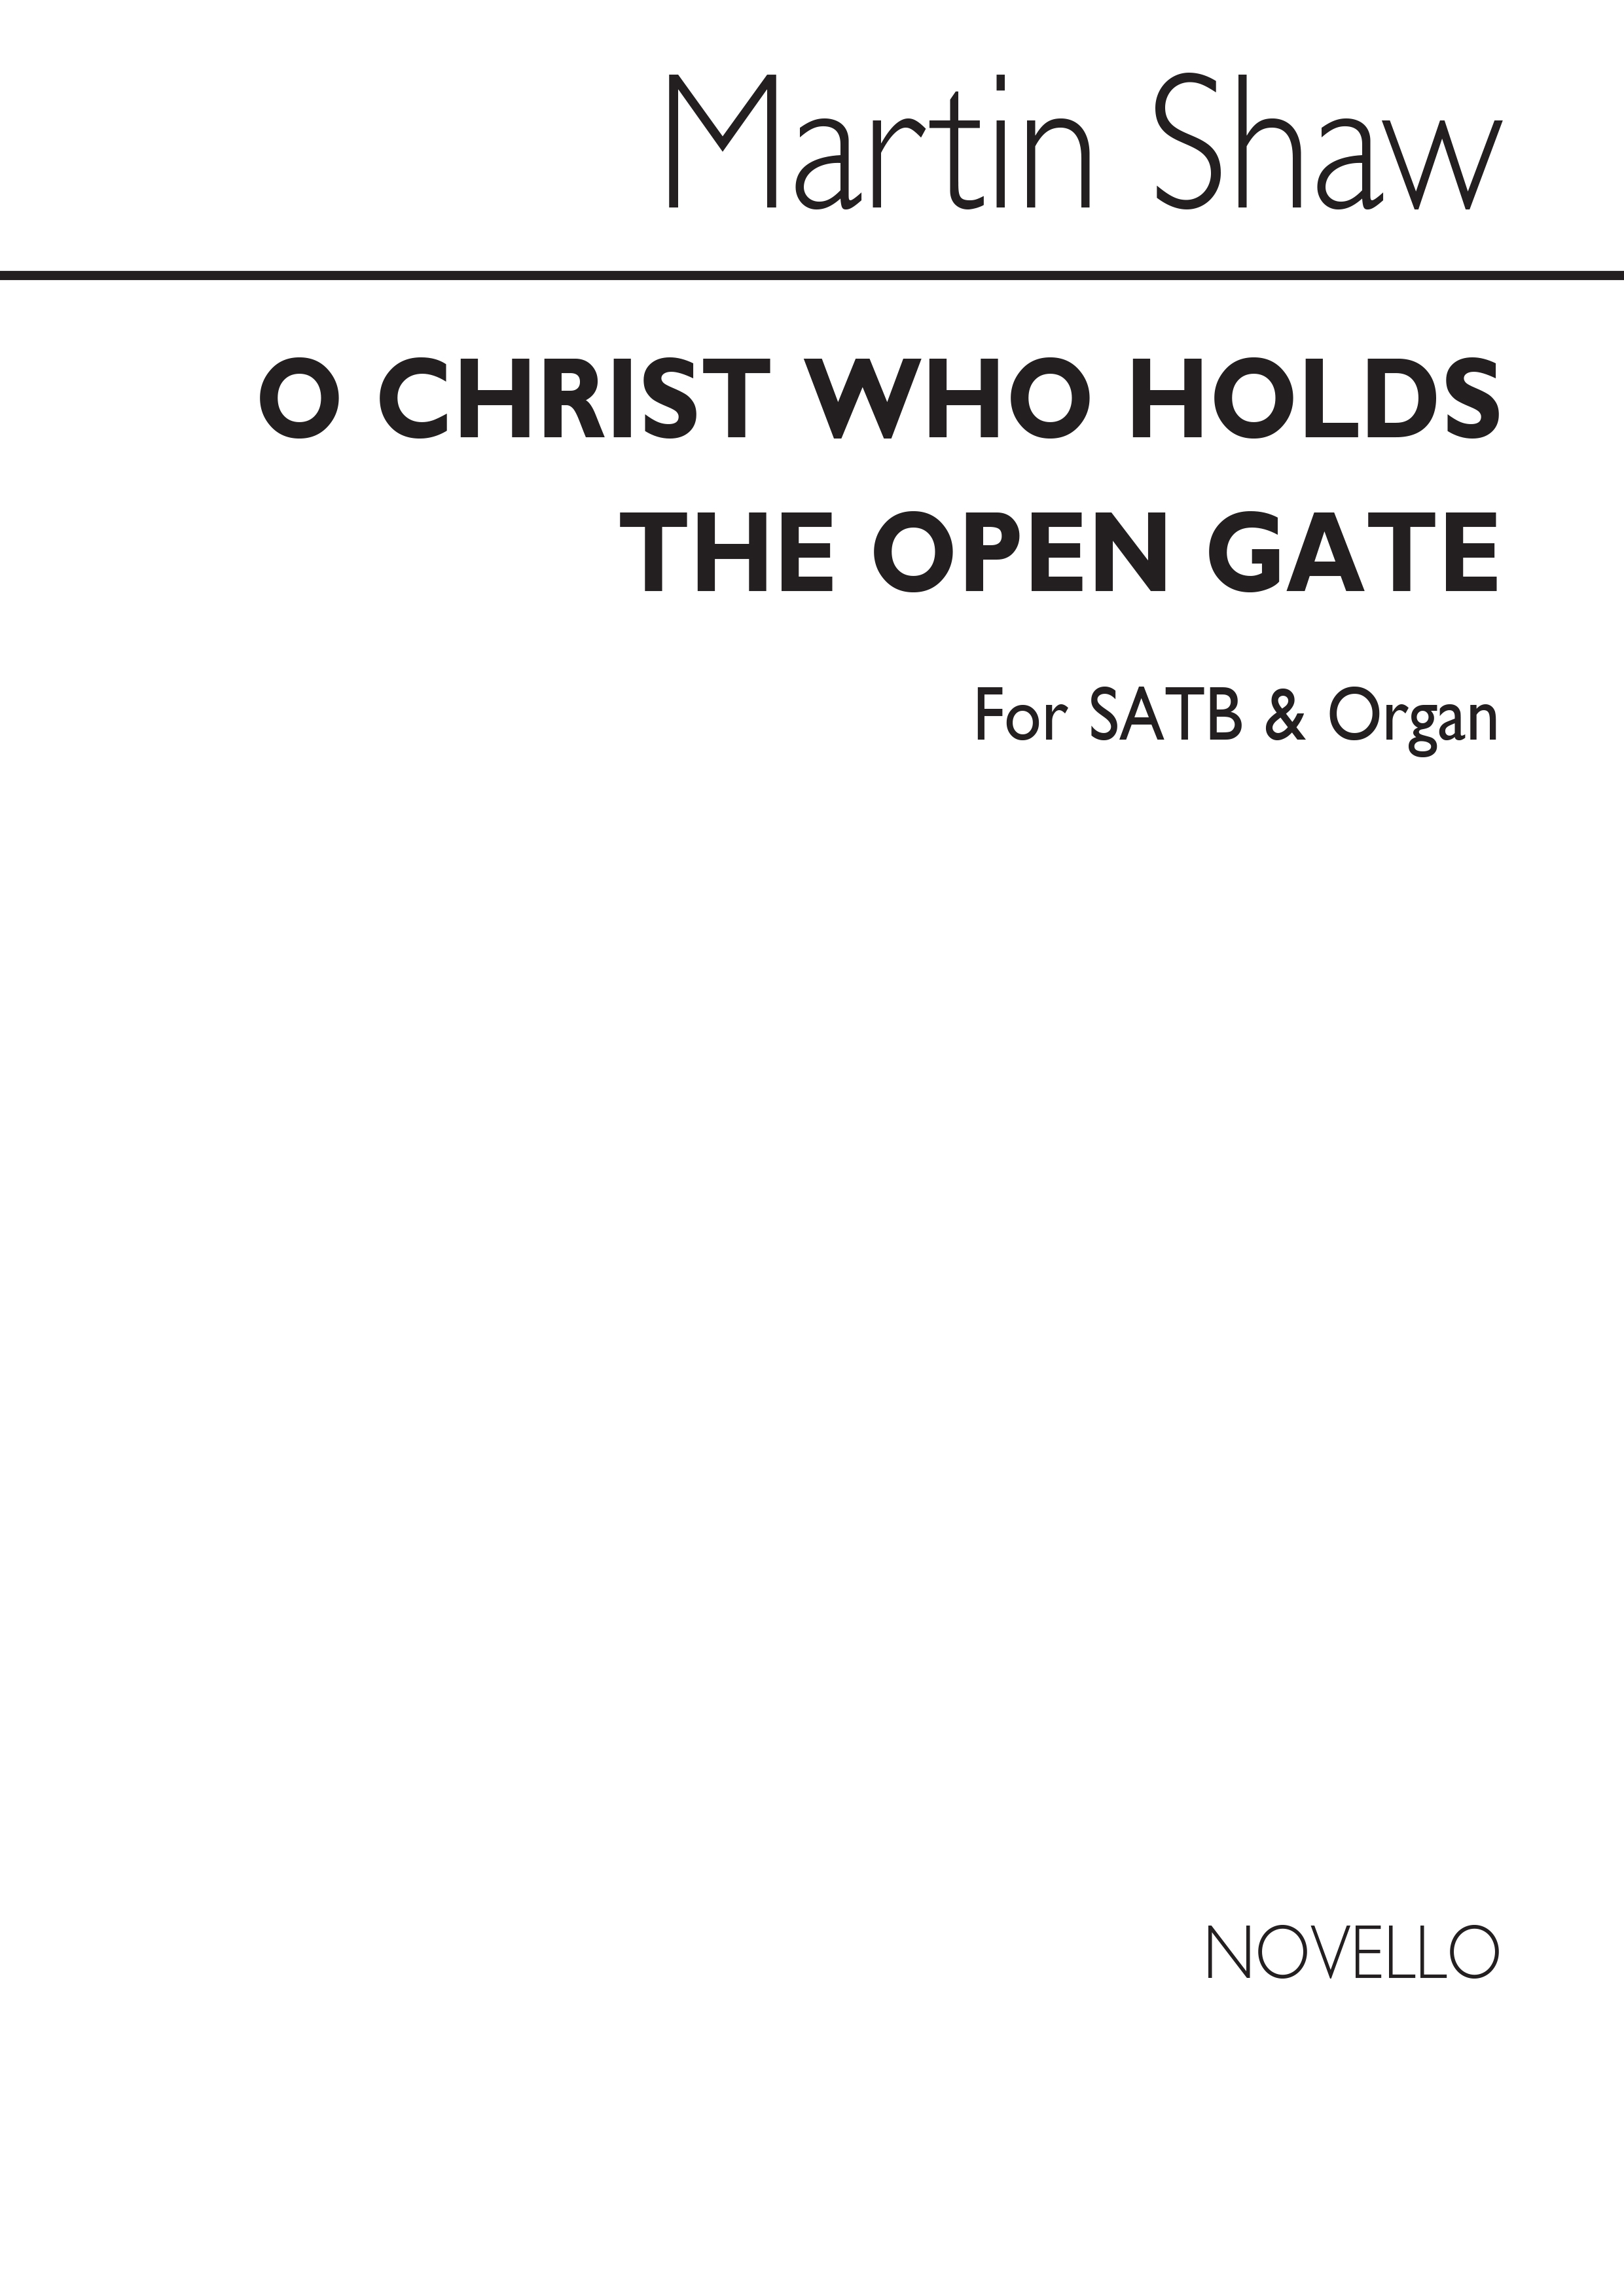 Martin Shaw: O Christ Who Hold The Open Gate for SATB Chorus with Organ acc.